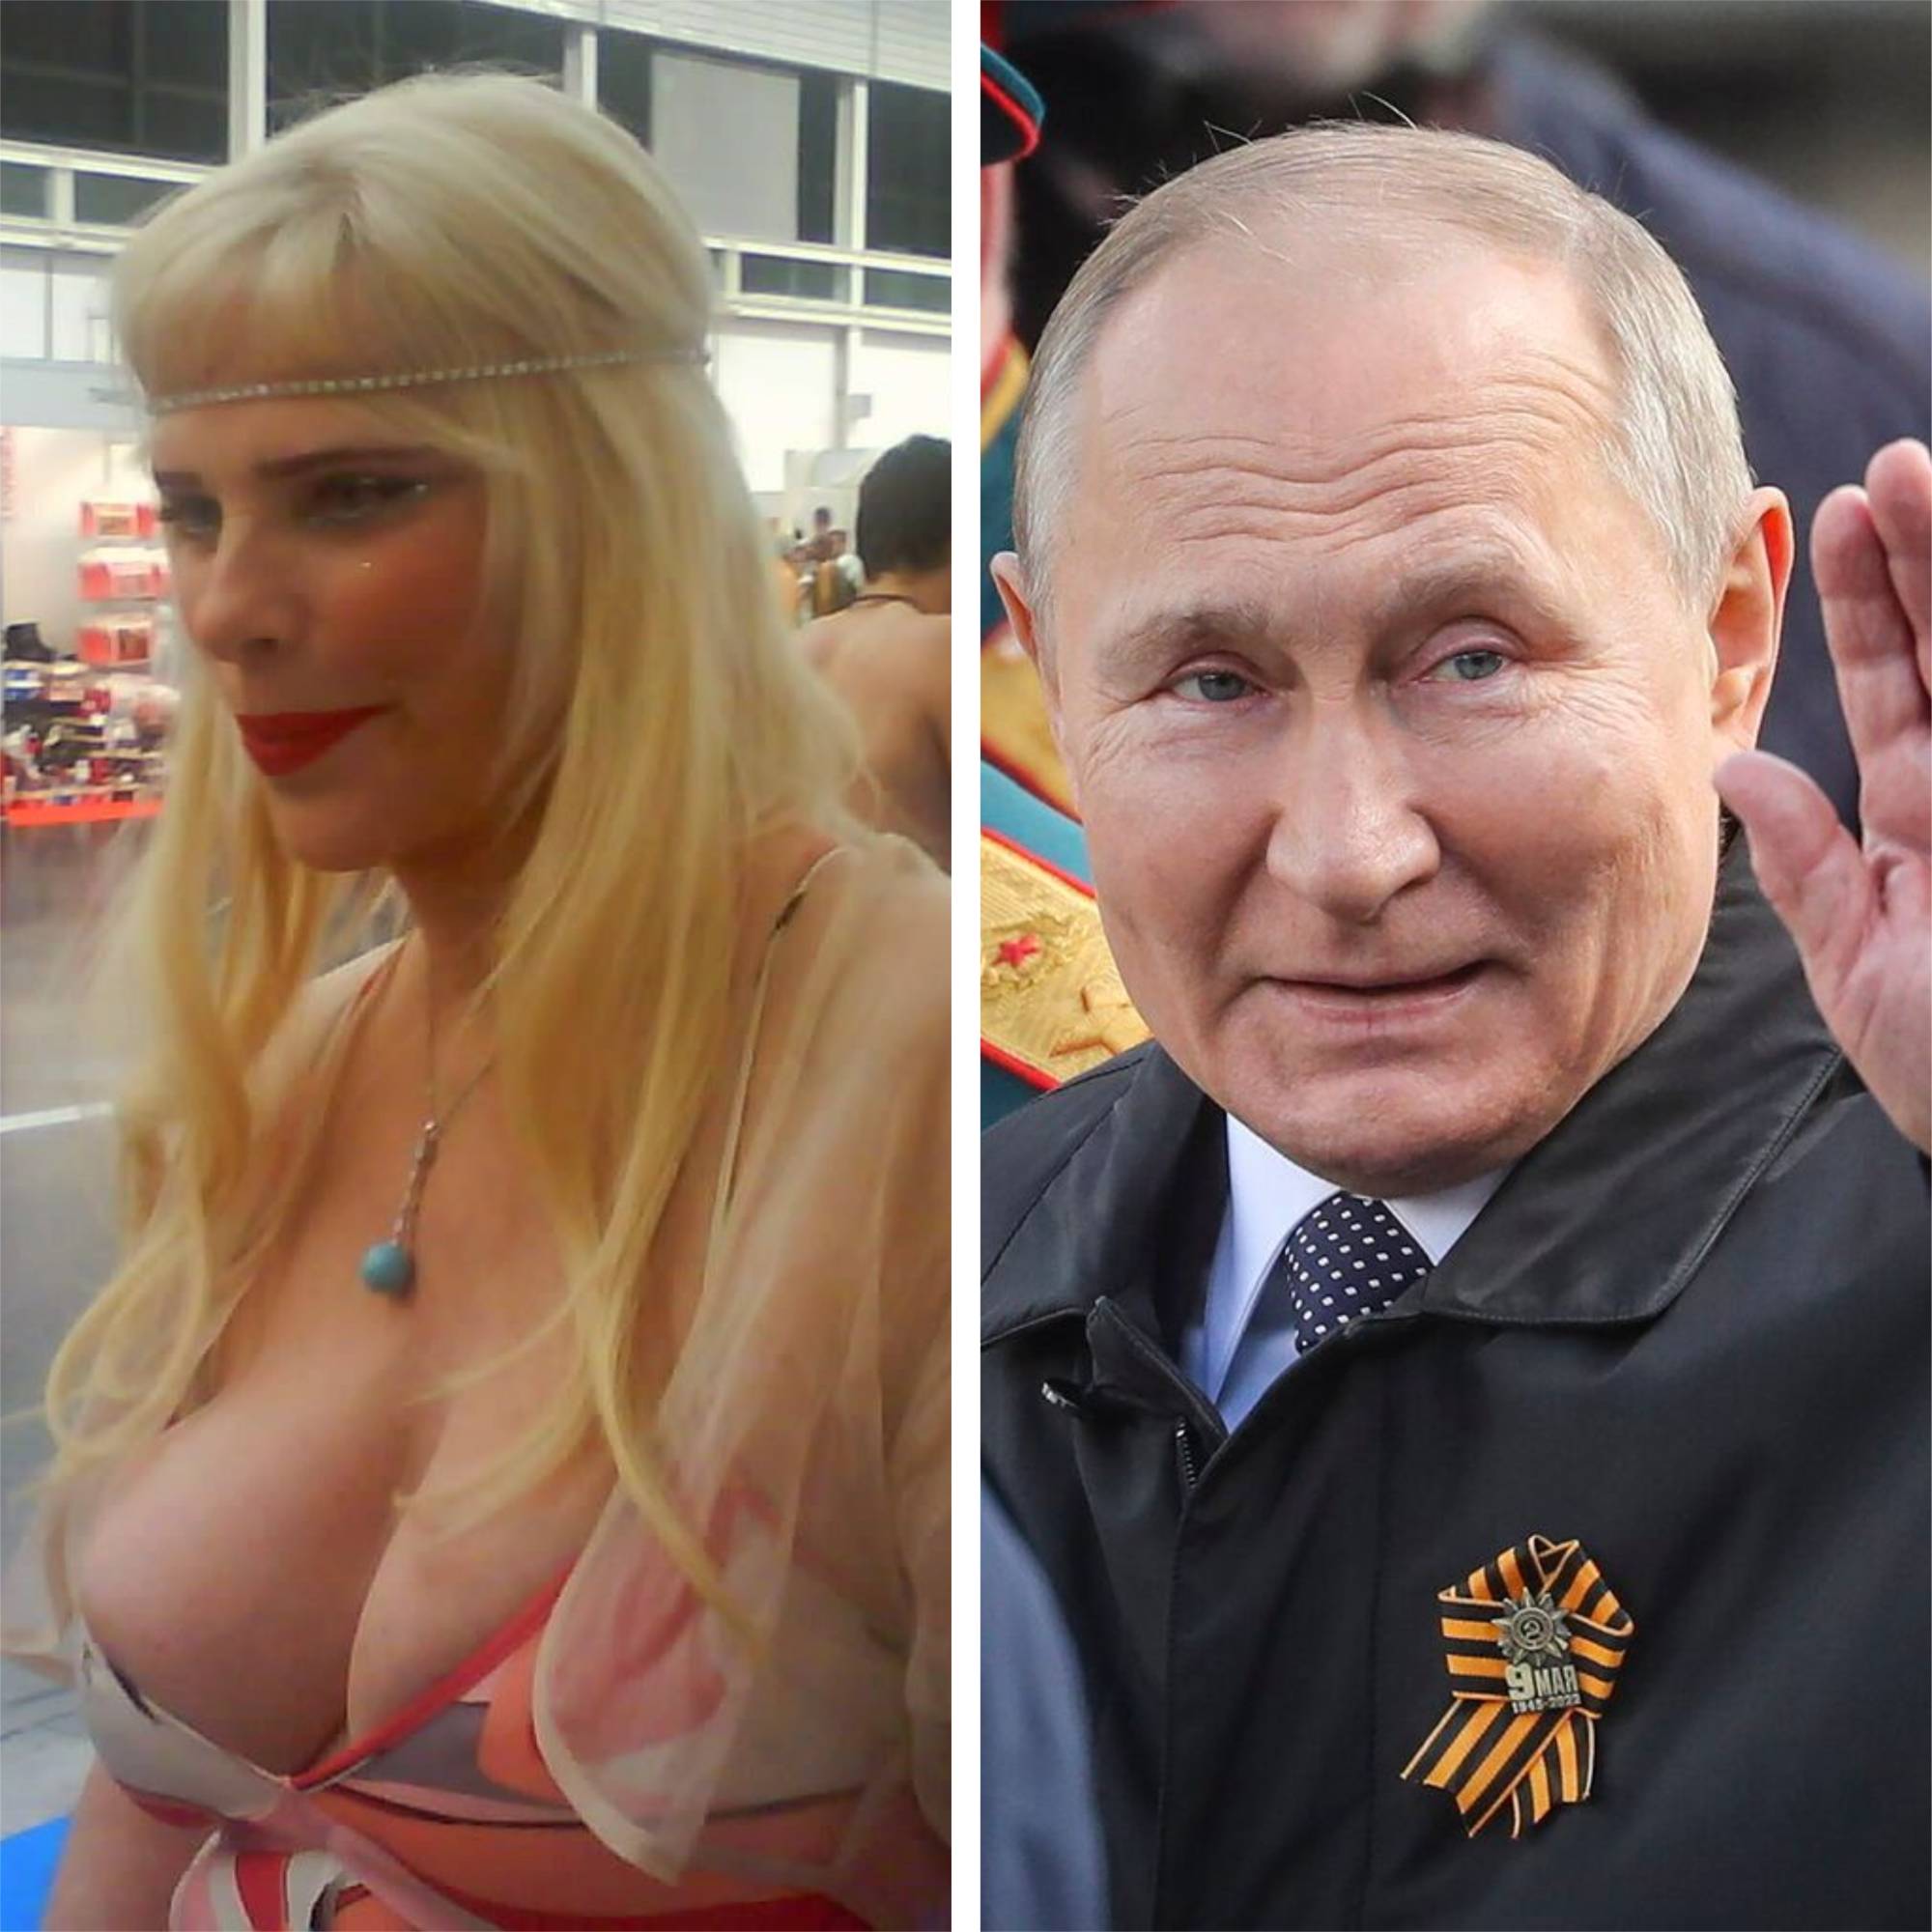 Hungarian porn star promised Putin sex if he ends the war - Daily News  Hungary